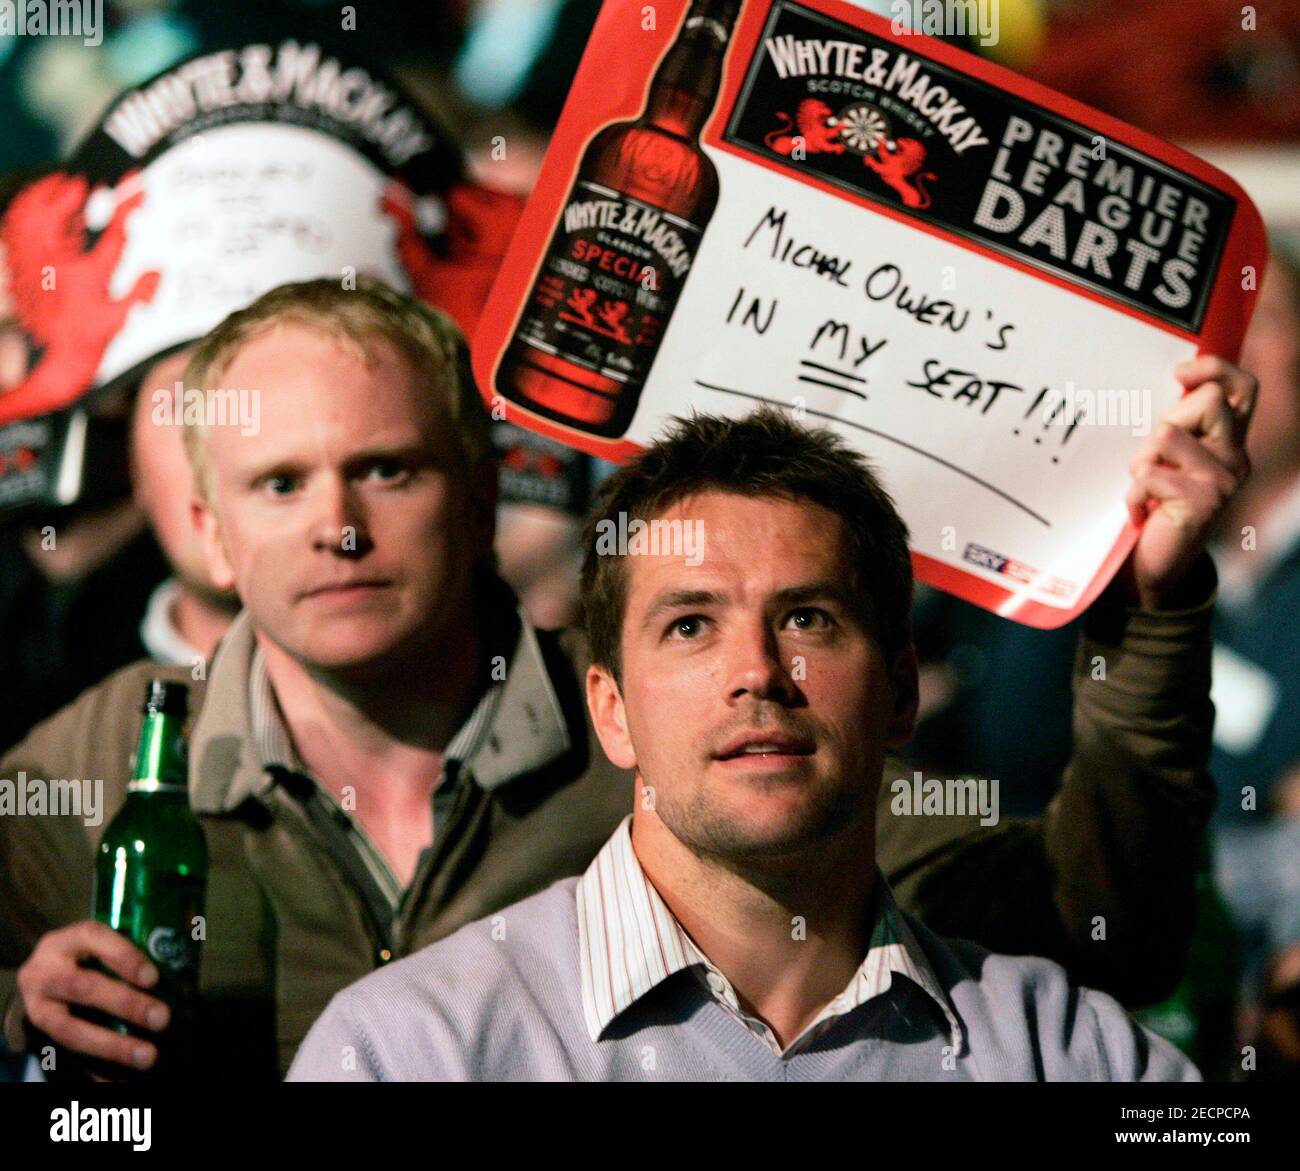 Darts - Whyte & Mackay Premier League Darts - Metro Radio Arena, Newcastle  - 1/5/08 Newcastle's Michael Owen (front) in the crowd Mandatory Credit:  Action Images / Lee Smith Livepic Stock Photo - Alamy